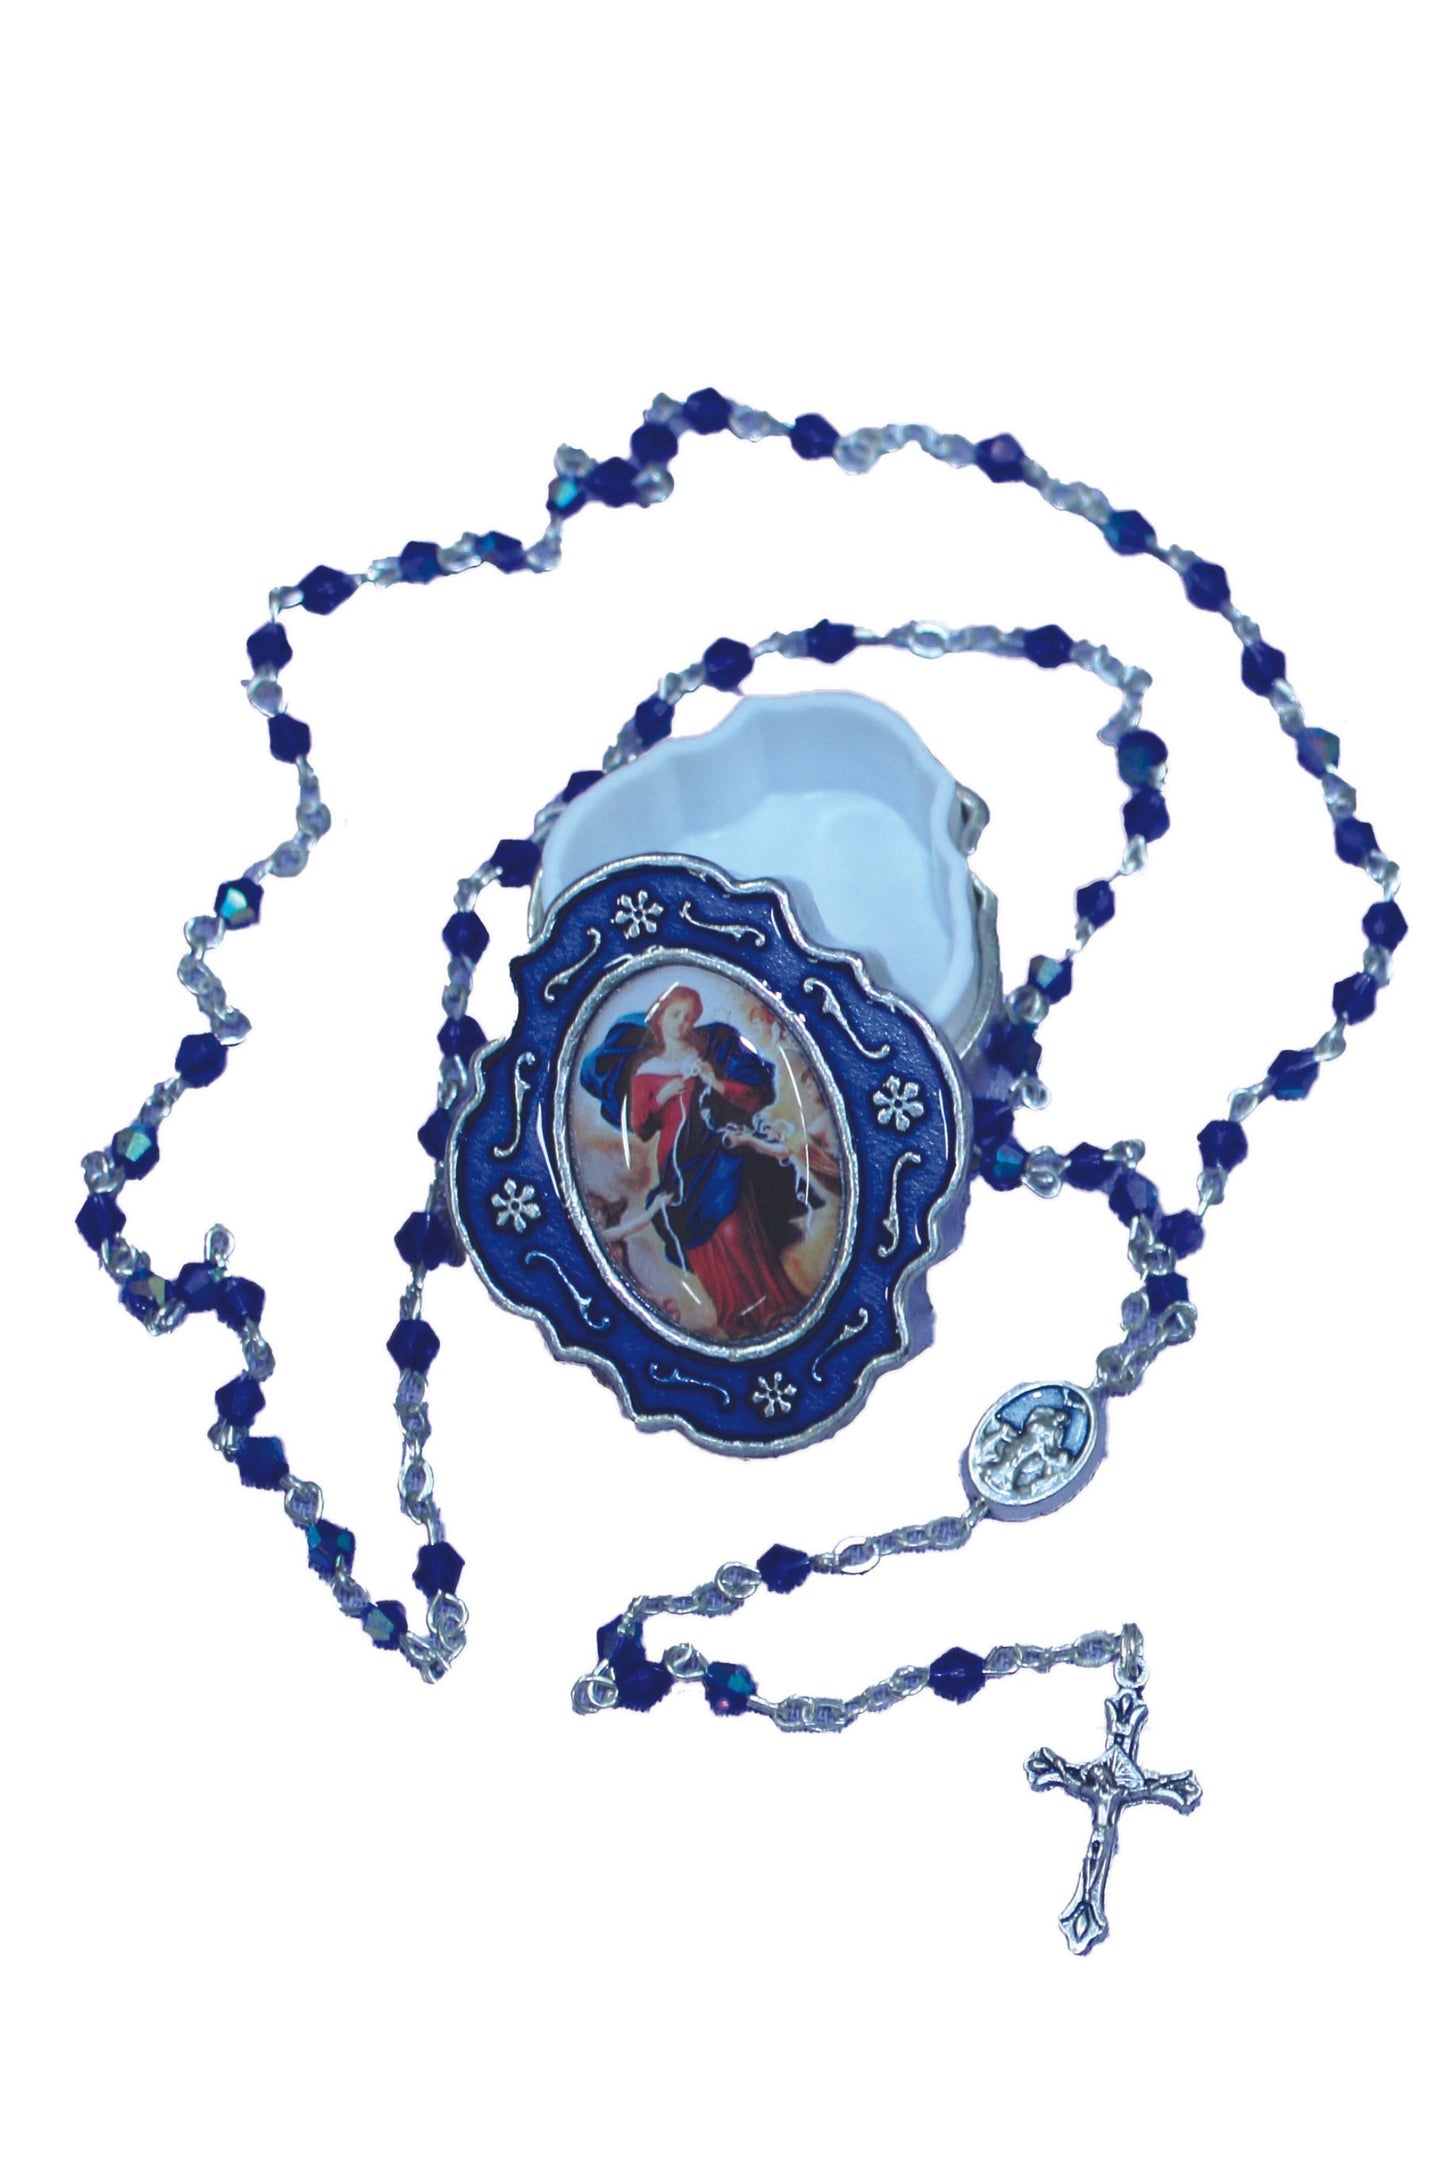 AL-1692 Our Lady Undoer of Knots Rosary and Box 13.5"